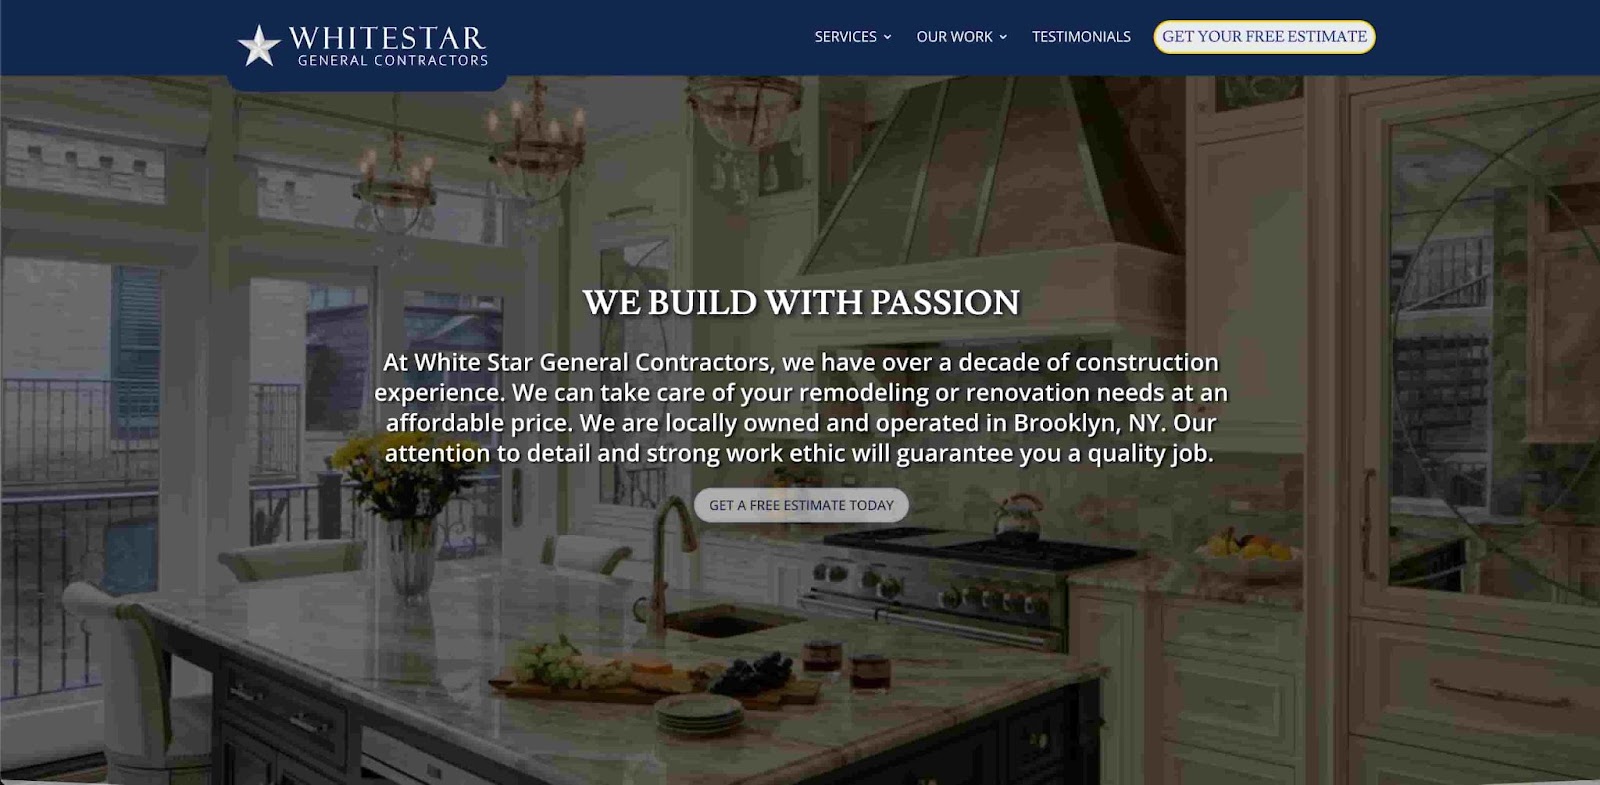 whitestar general contractors homepage with story of experience and CTA